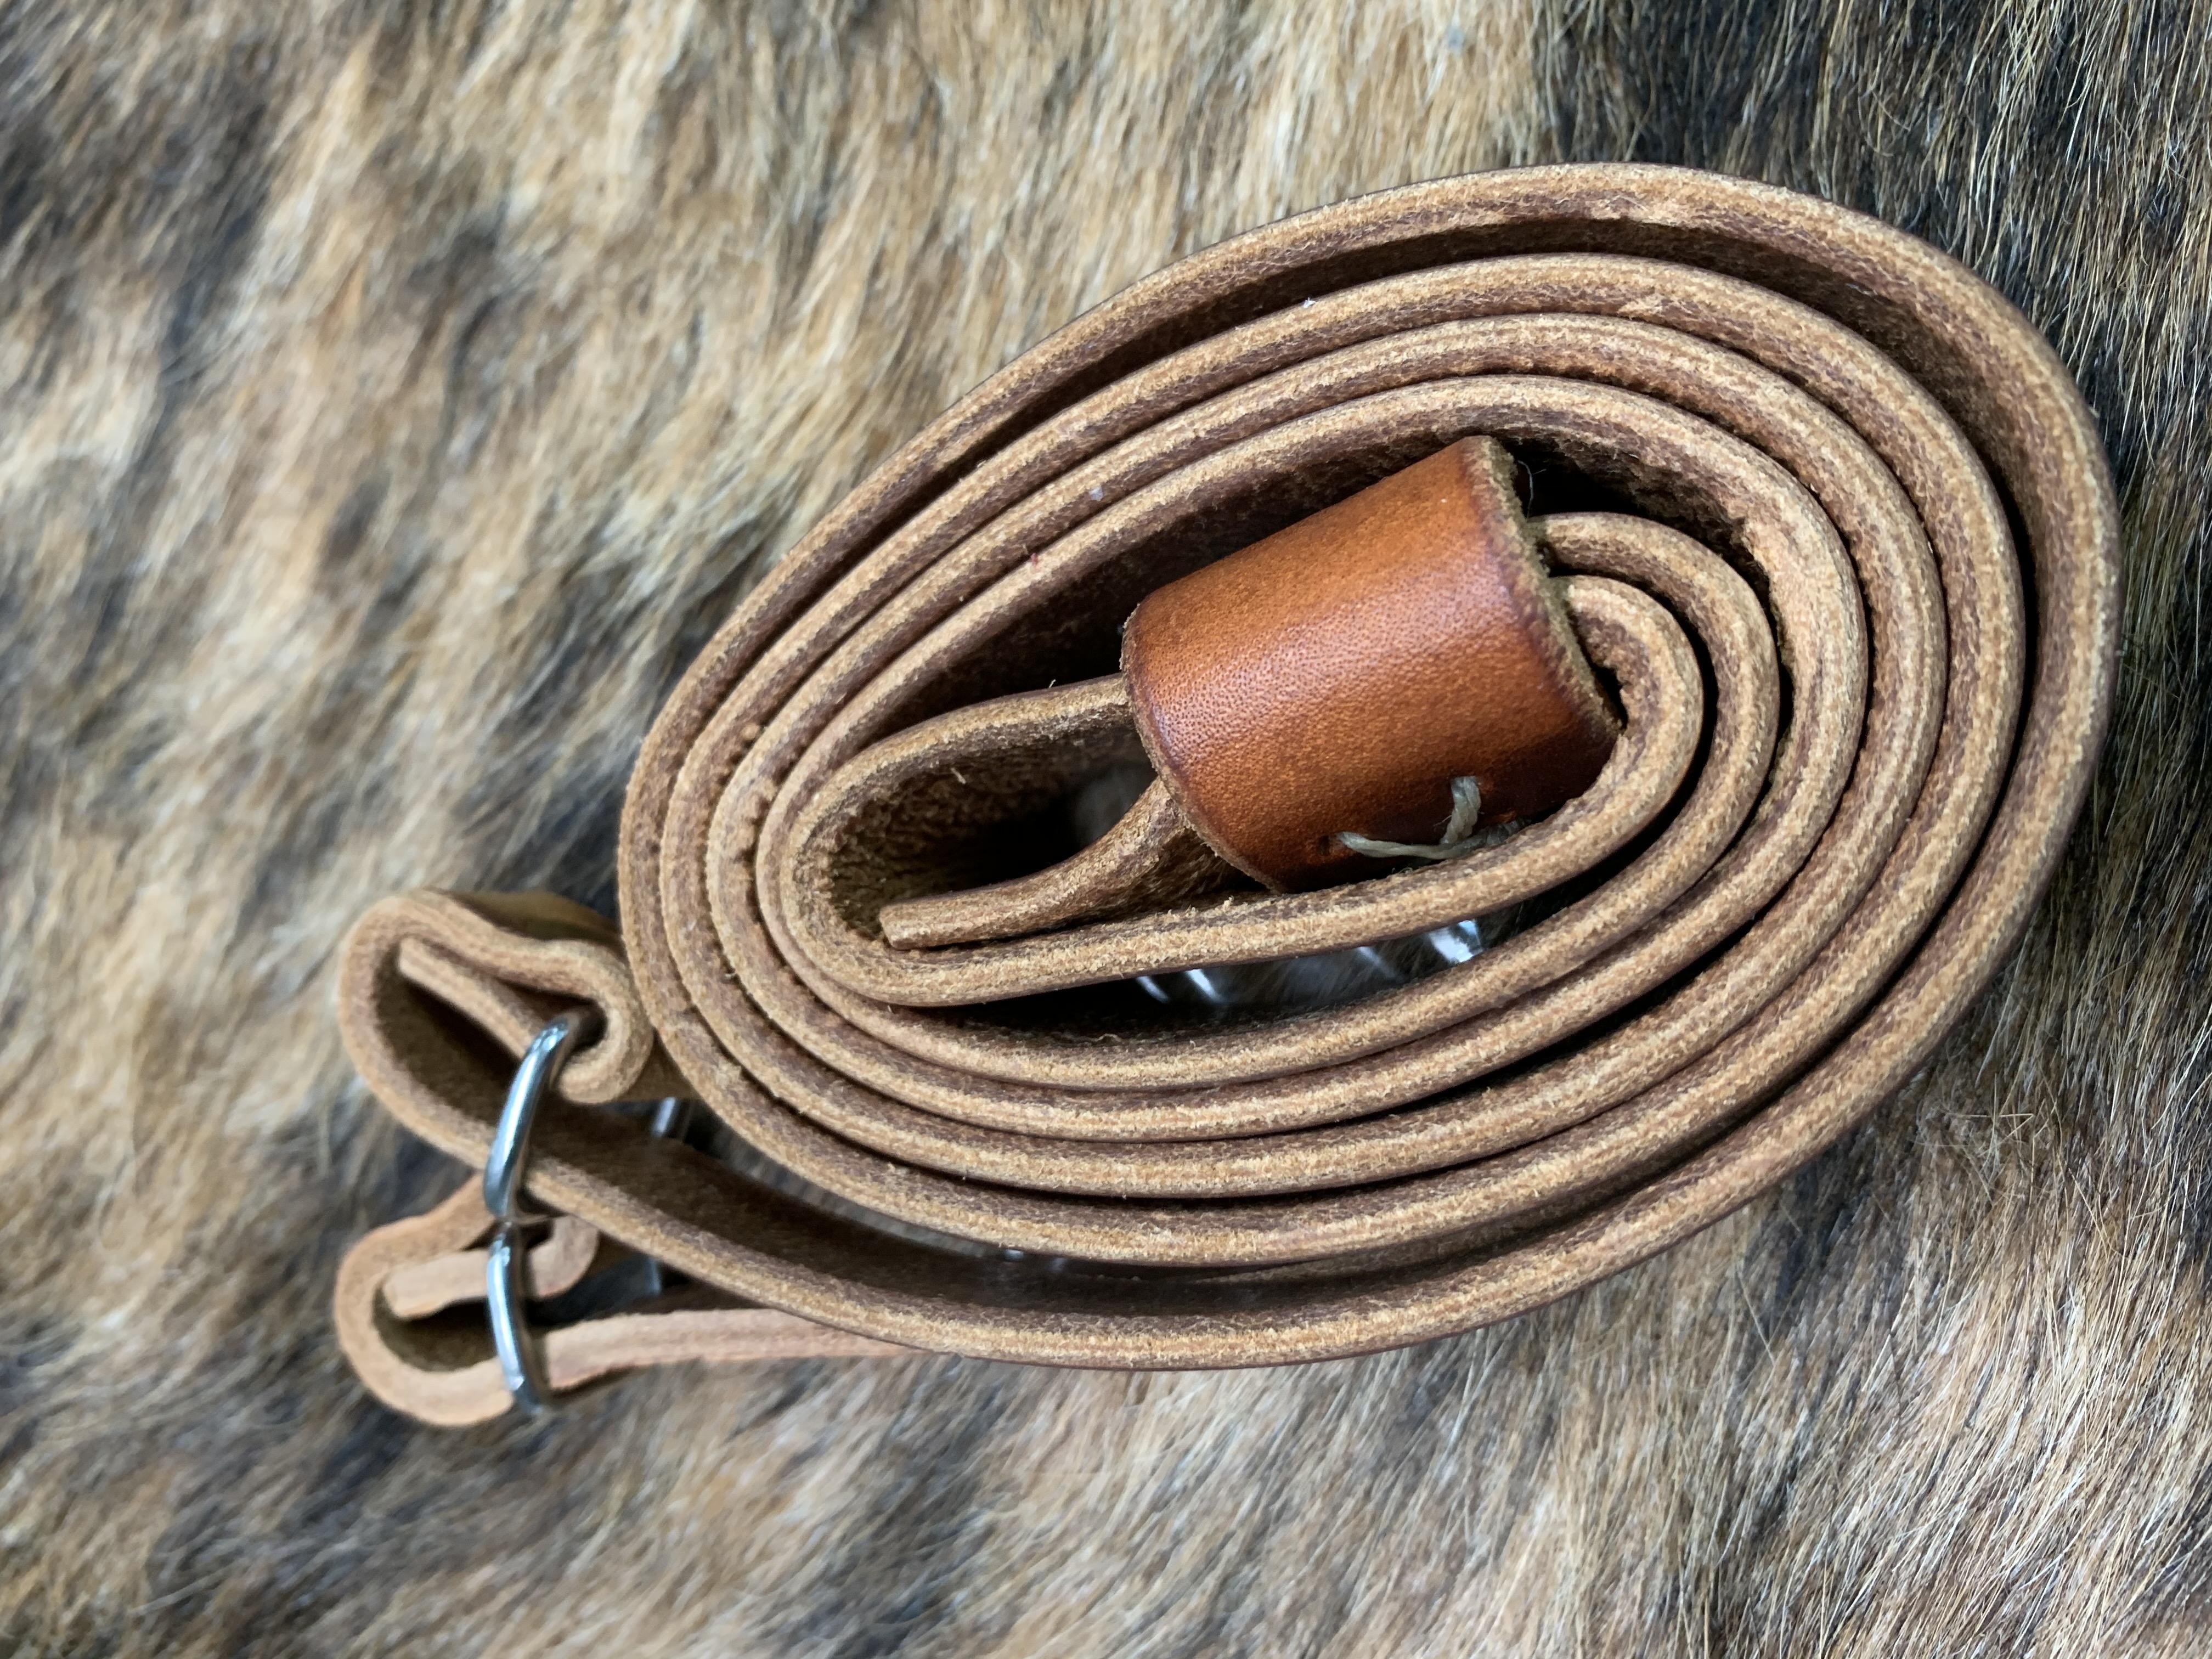 Limb Hanger Turkey Tote | DuckTote - Leather Hunting Totes and Lanyards